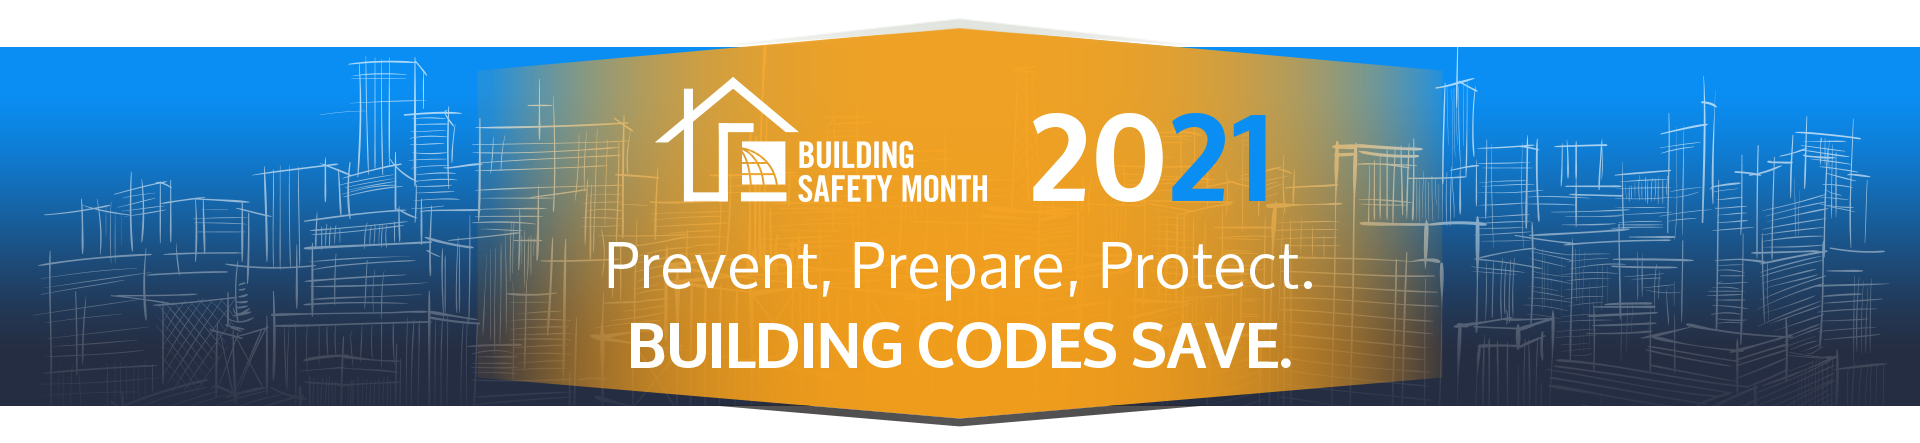 2021 Building Safety Month Safety Toolkit